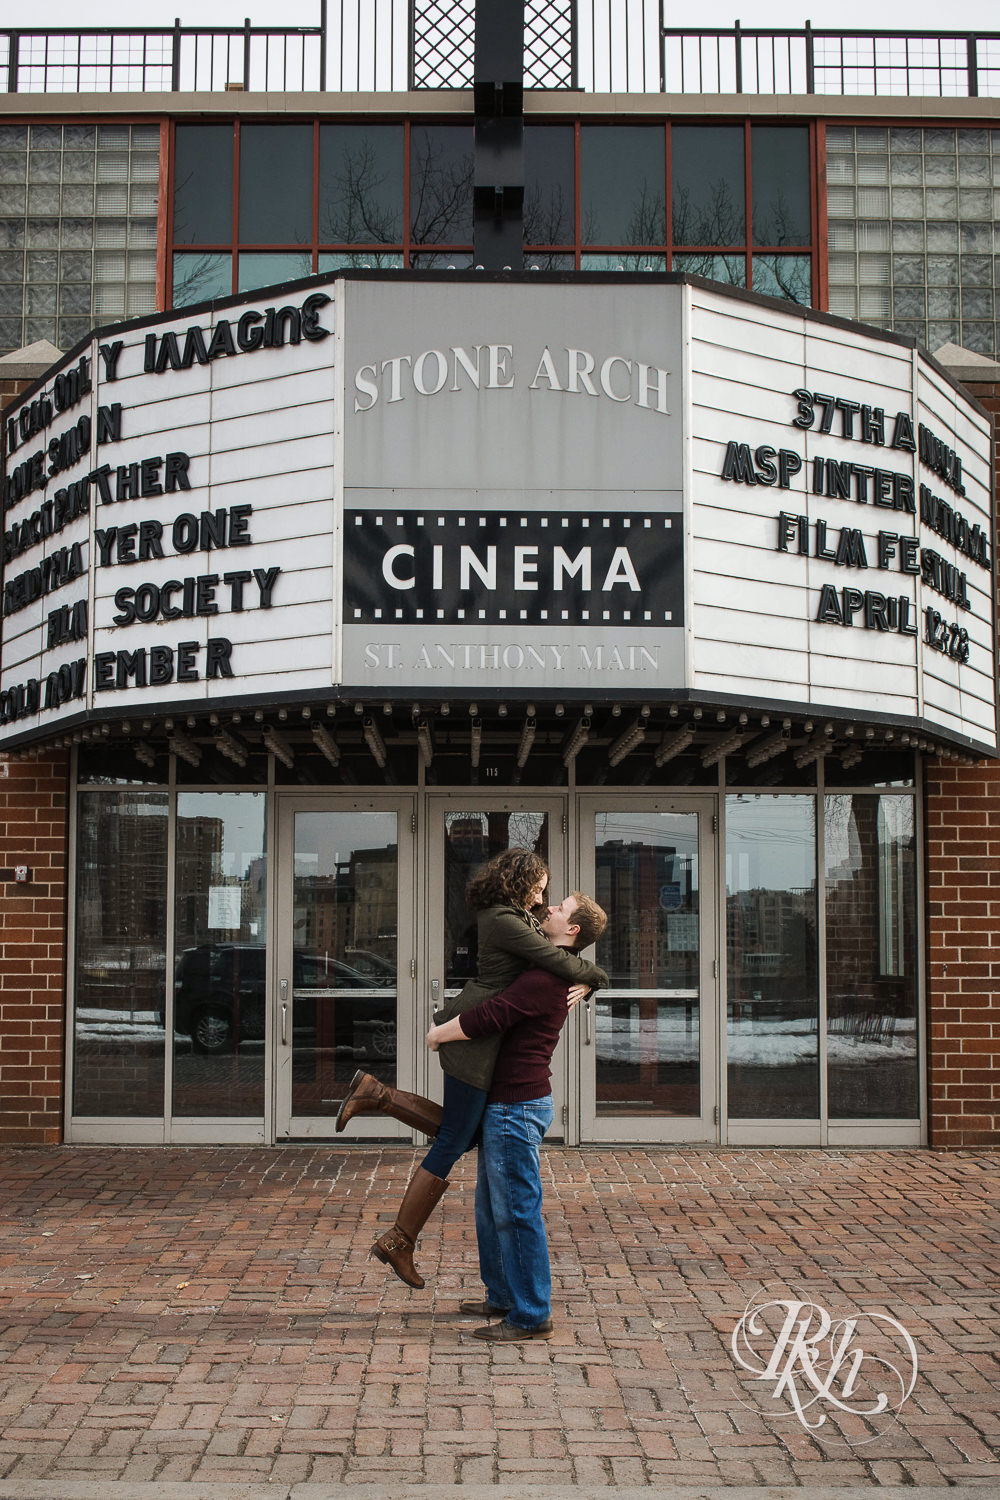 Man lifts woman in front of the Stone Arch Cinema in Minneapolis, Minnesota.